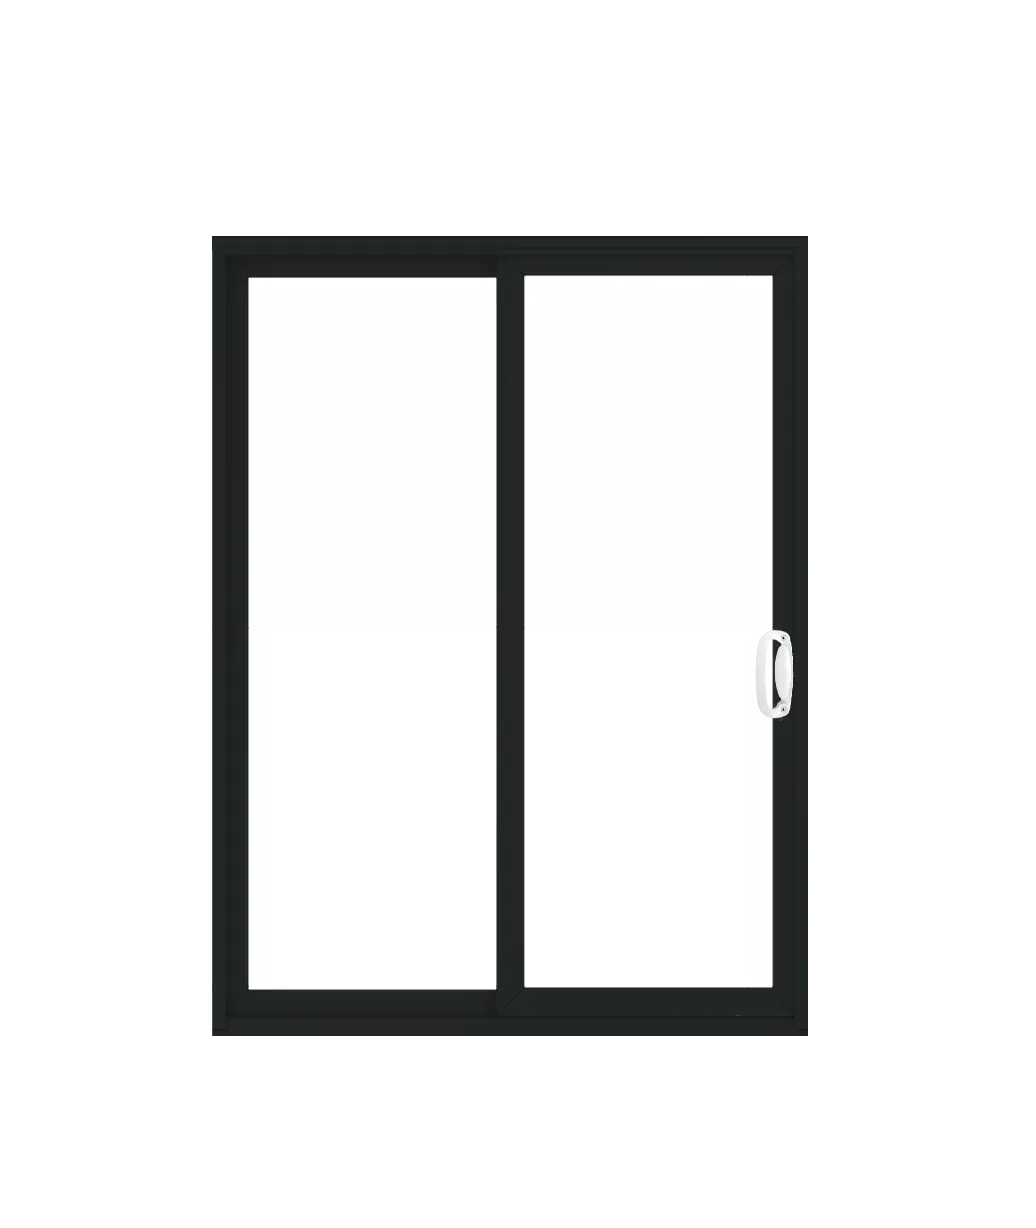 ANDERSEN PS5 200 Series Permashield 59-1/4" X 79-1/2" Sliding/Gliding Dual Pane Or Triple Pane Low-E Tempered Argon Fill Stainless Glass 2 Panel Patio Door Grilles/Screen Options